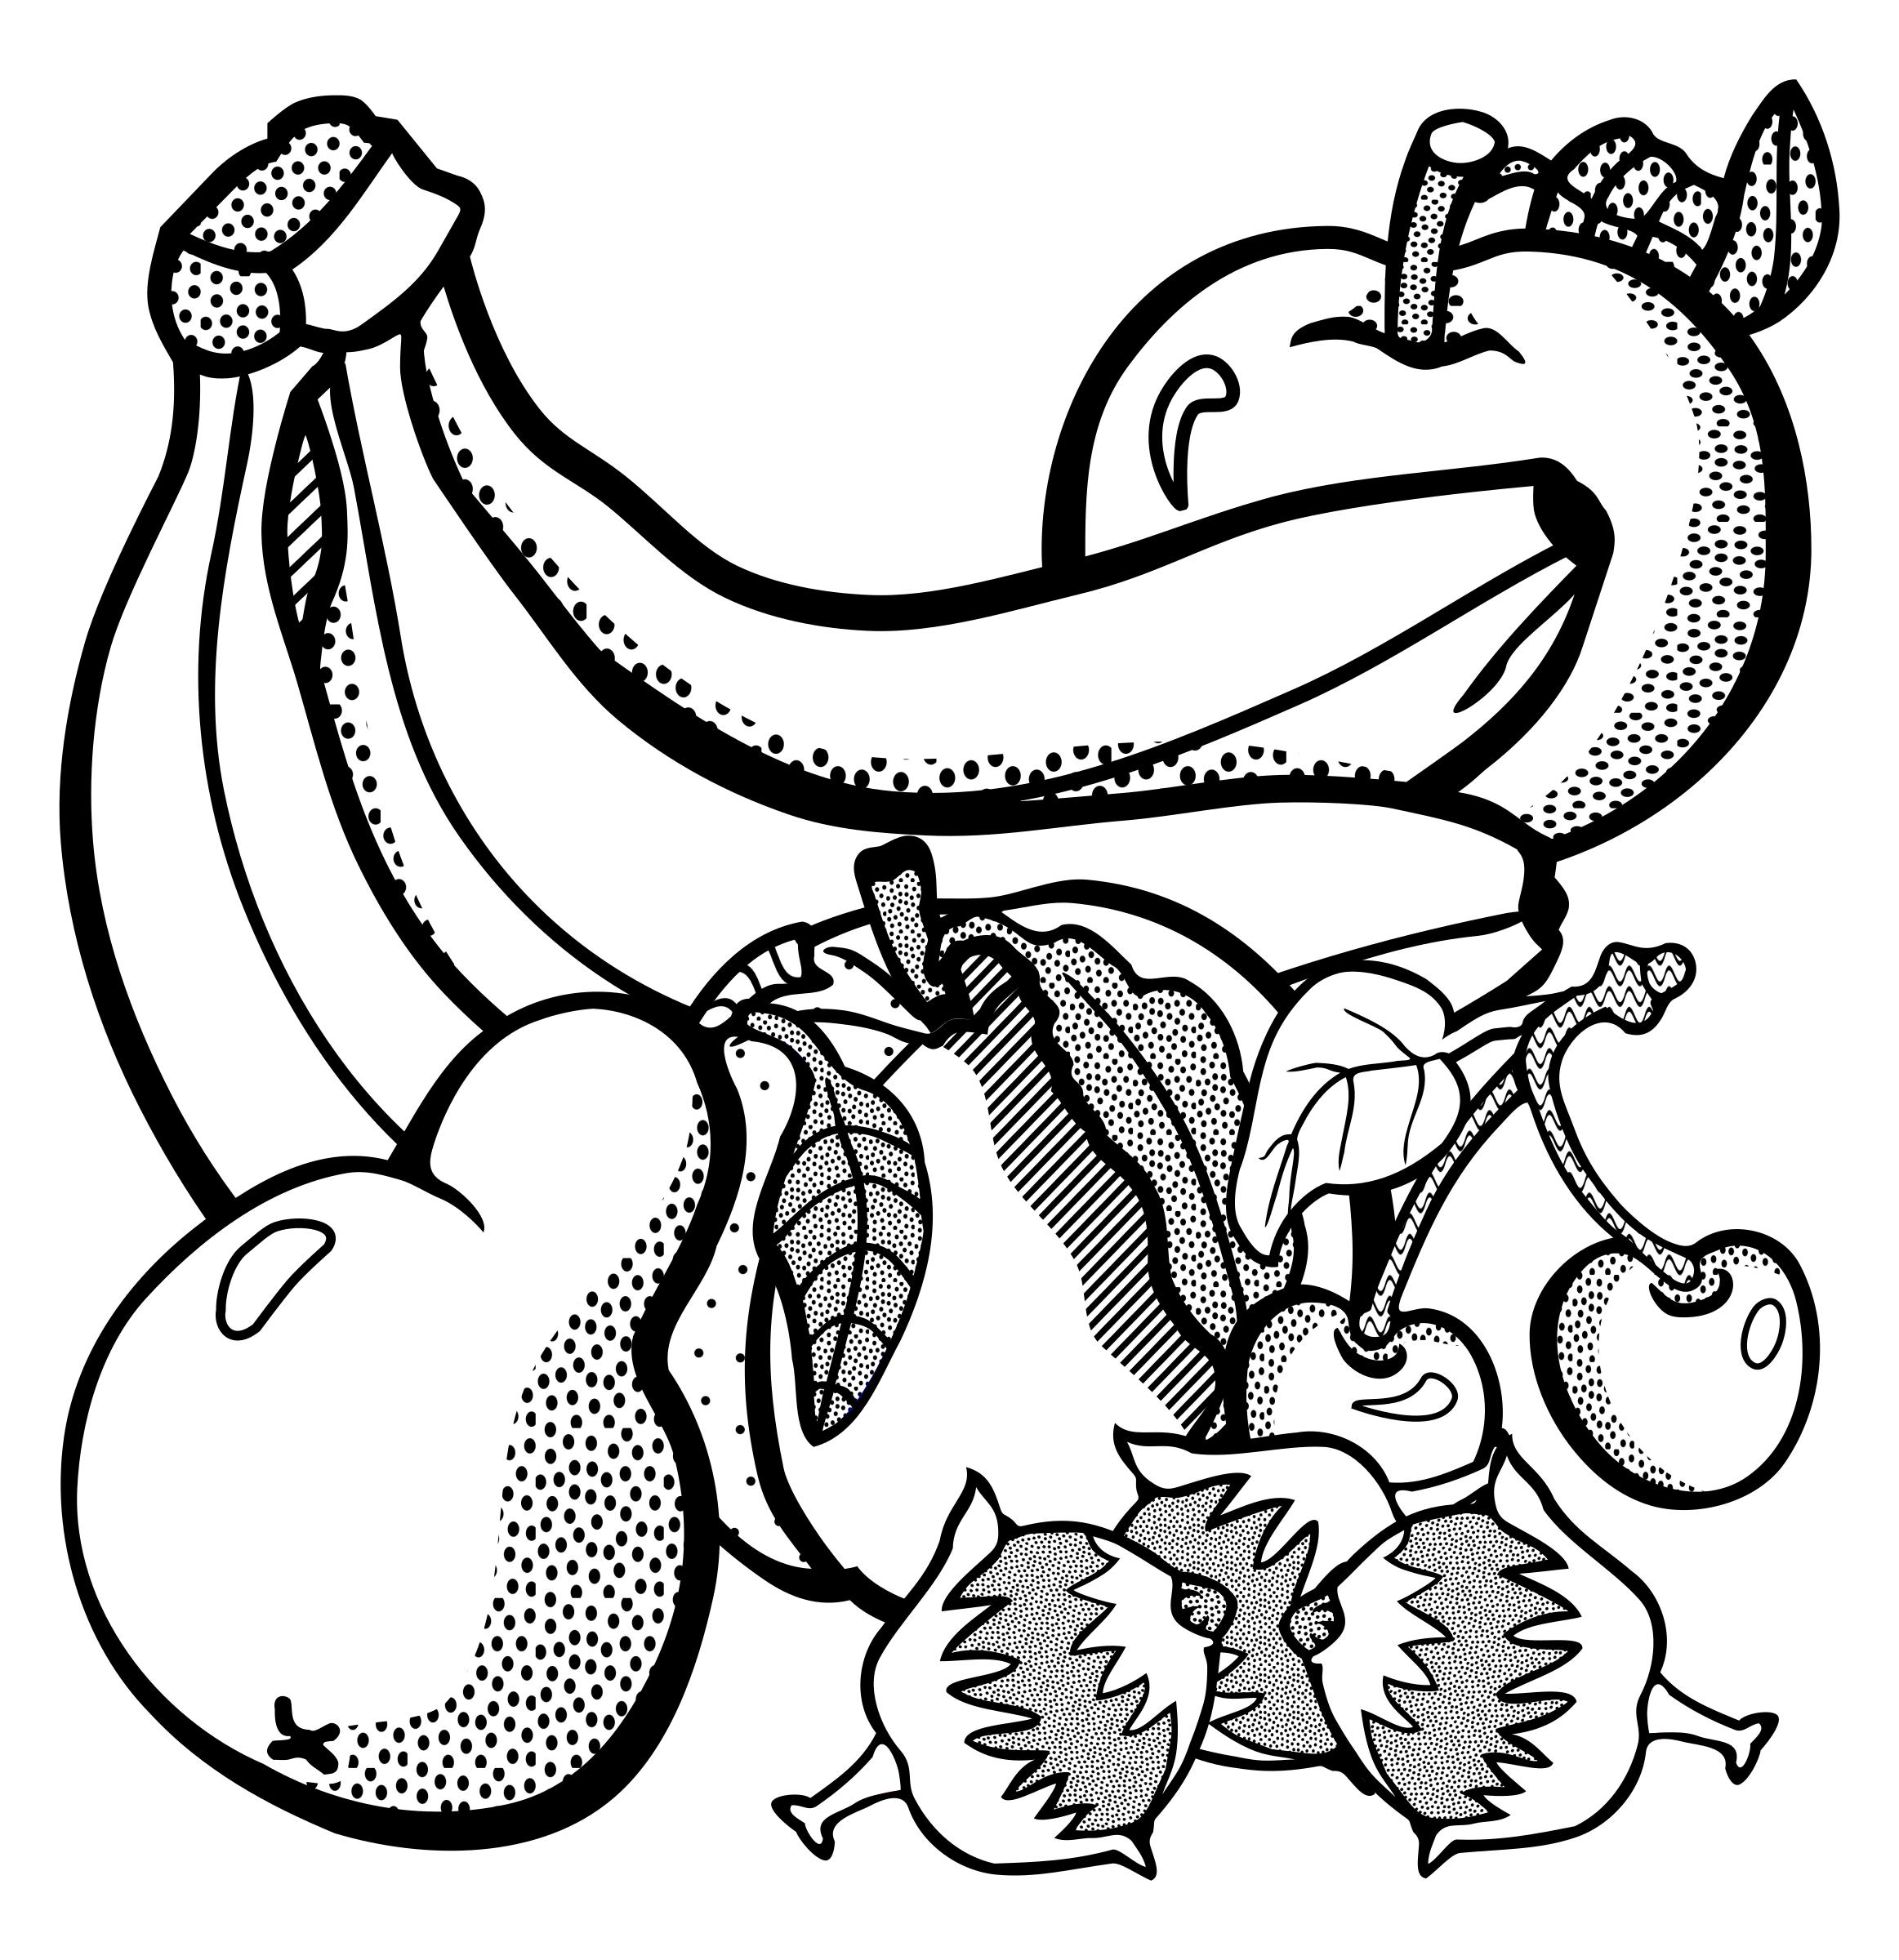 fruits - lineart png